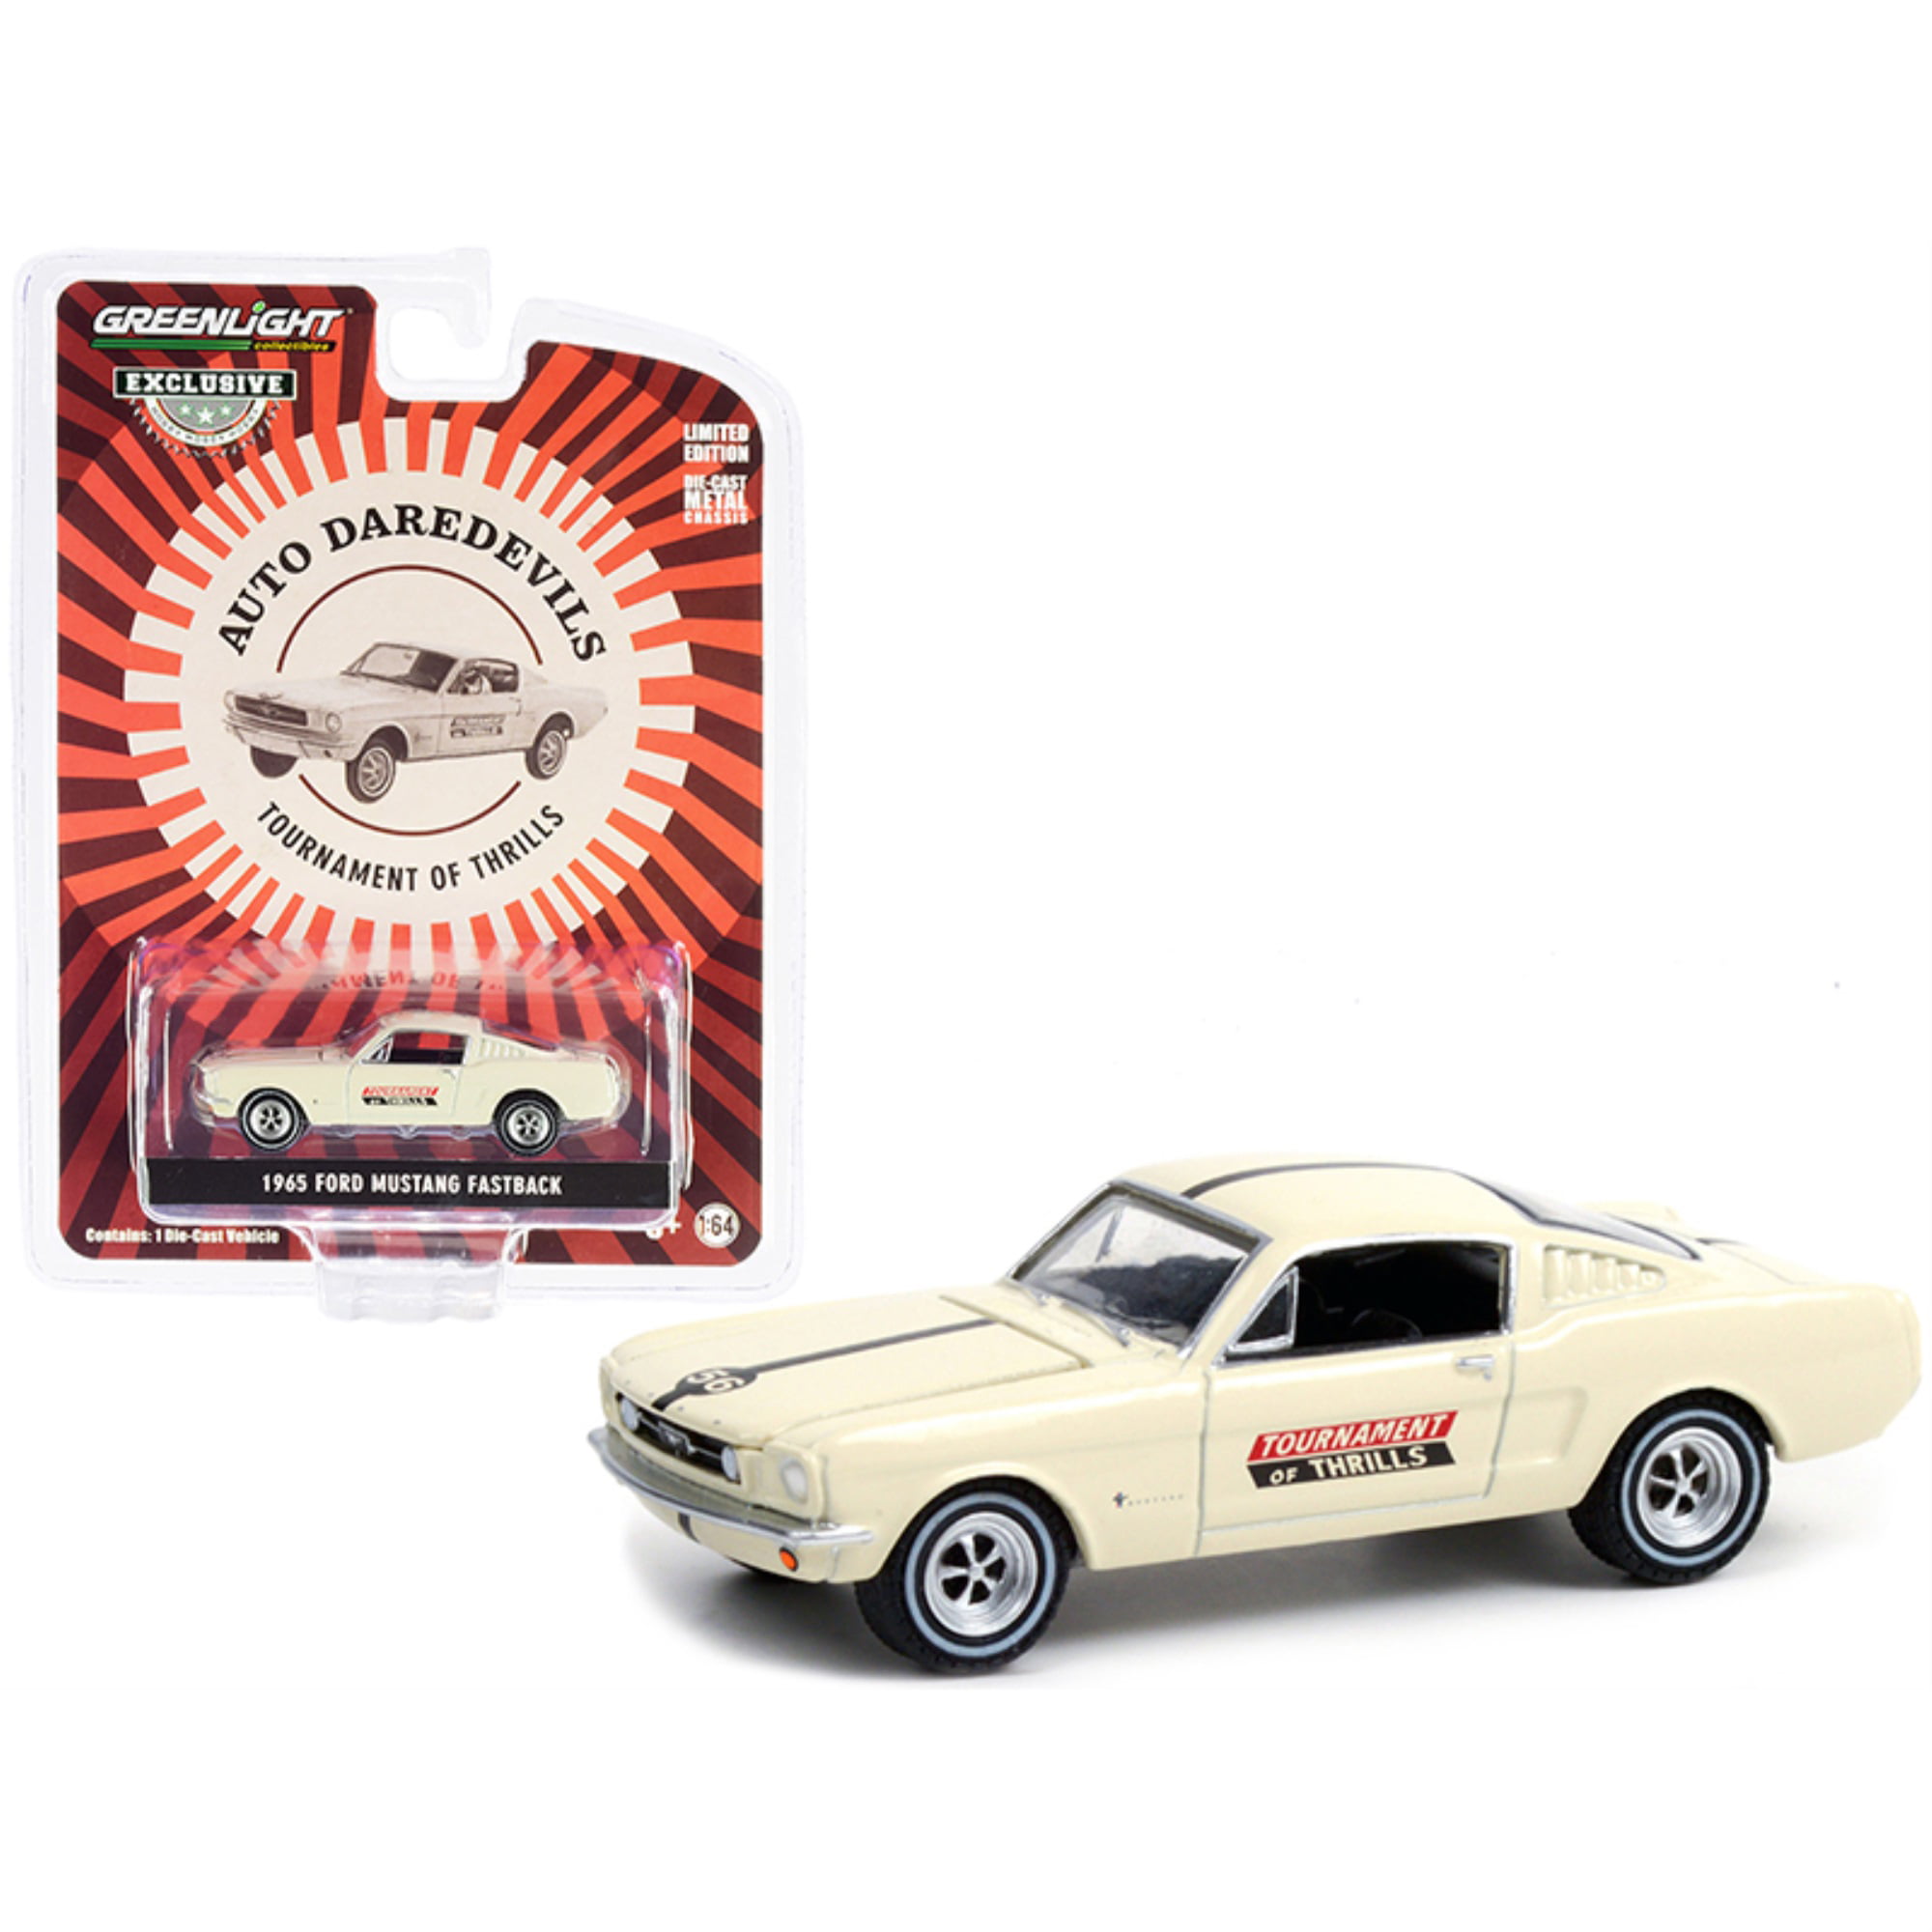 30265 1965 Ford Mustang Fastback No.56 Cream Auto Daredevils Tournament of Thrills Hobby Exclusive 1-64 Scale Diecast Model Car -  GreenLight